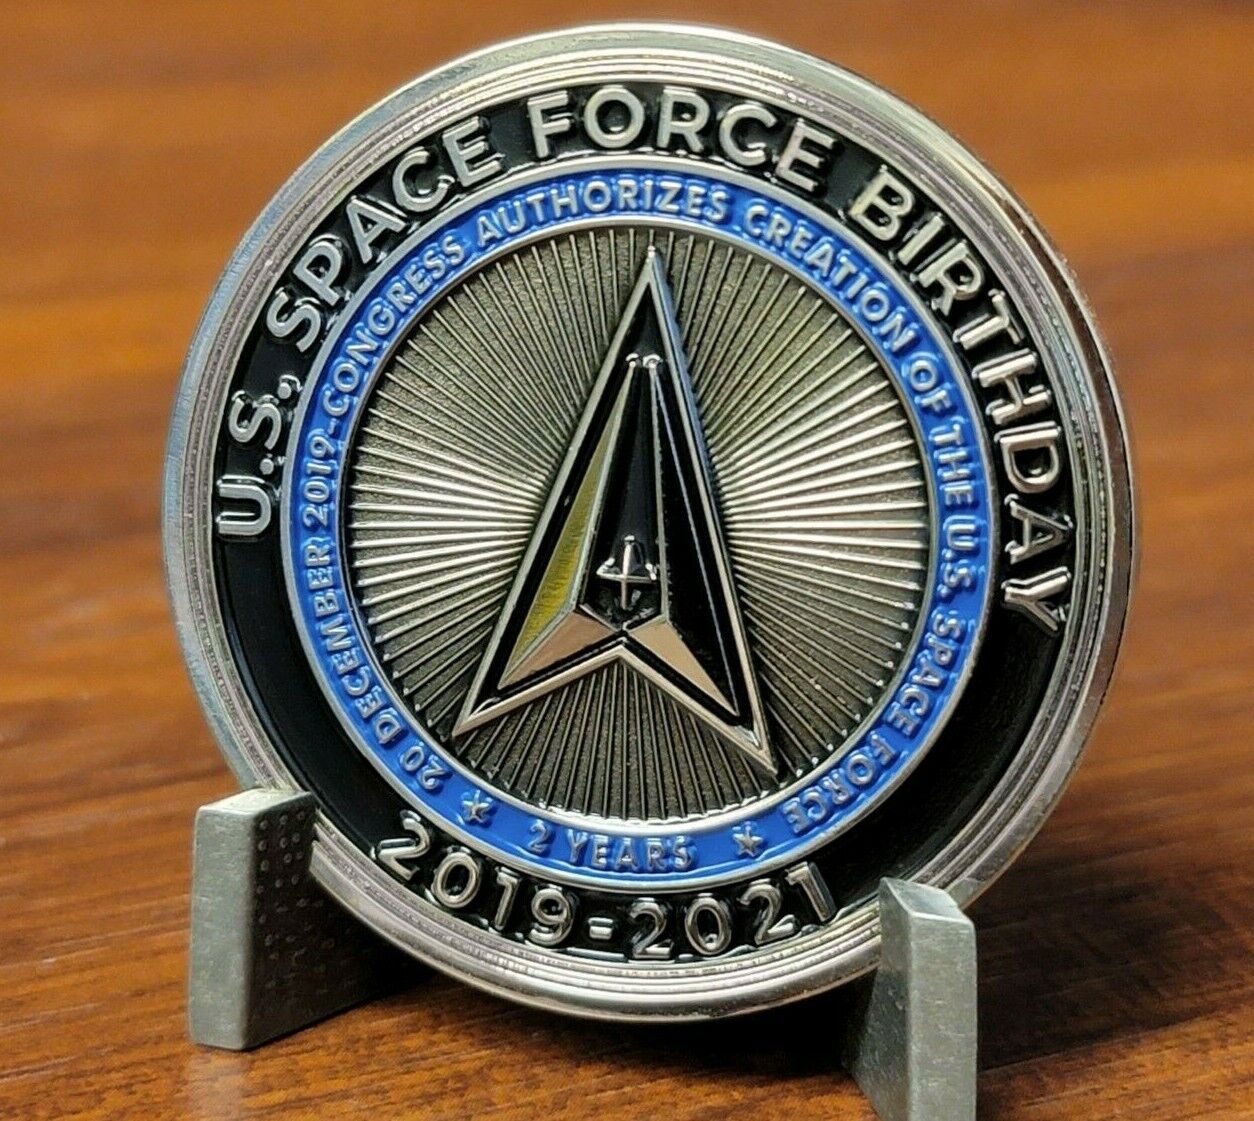 United States Space Force 2021 Birthday Challenge Coin